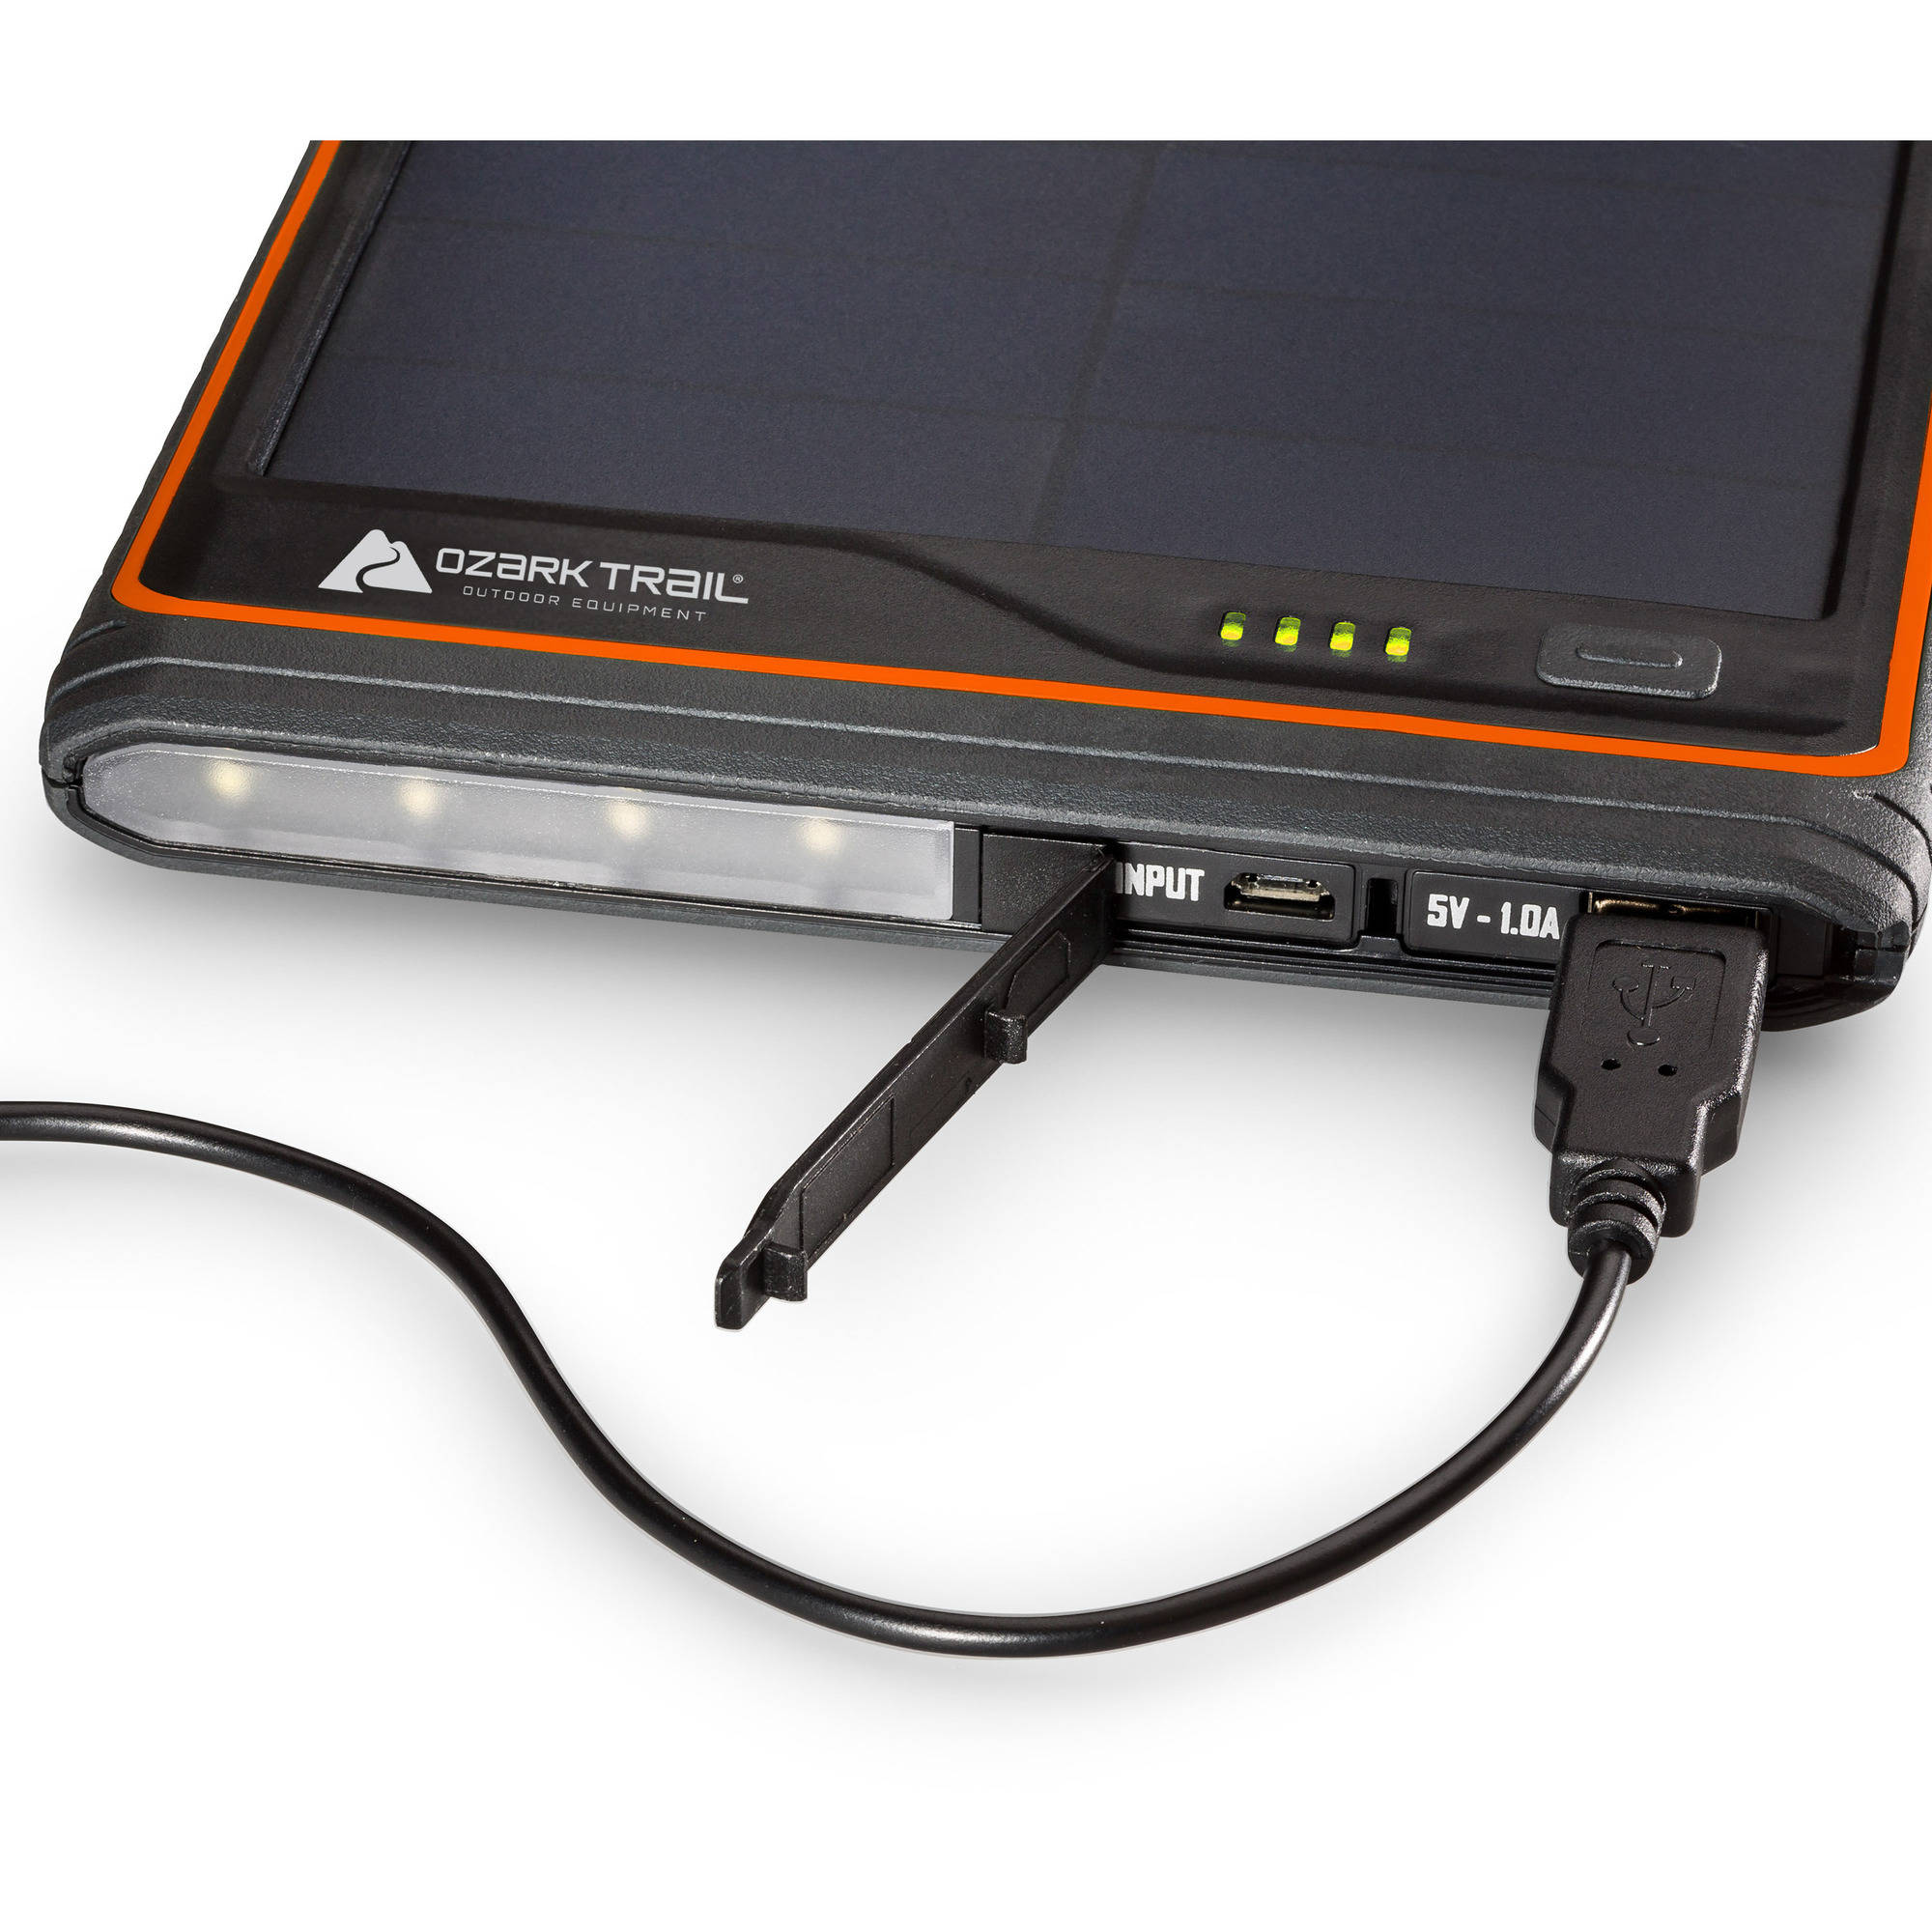 Ozark Trail 2400 Portable Phone Charger with Solar Panel - image 4 of 5